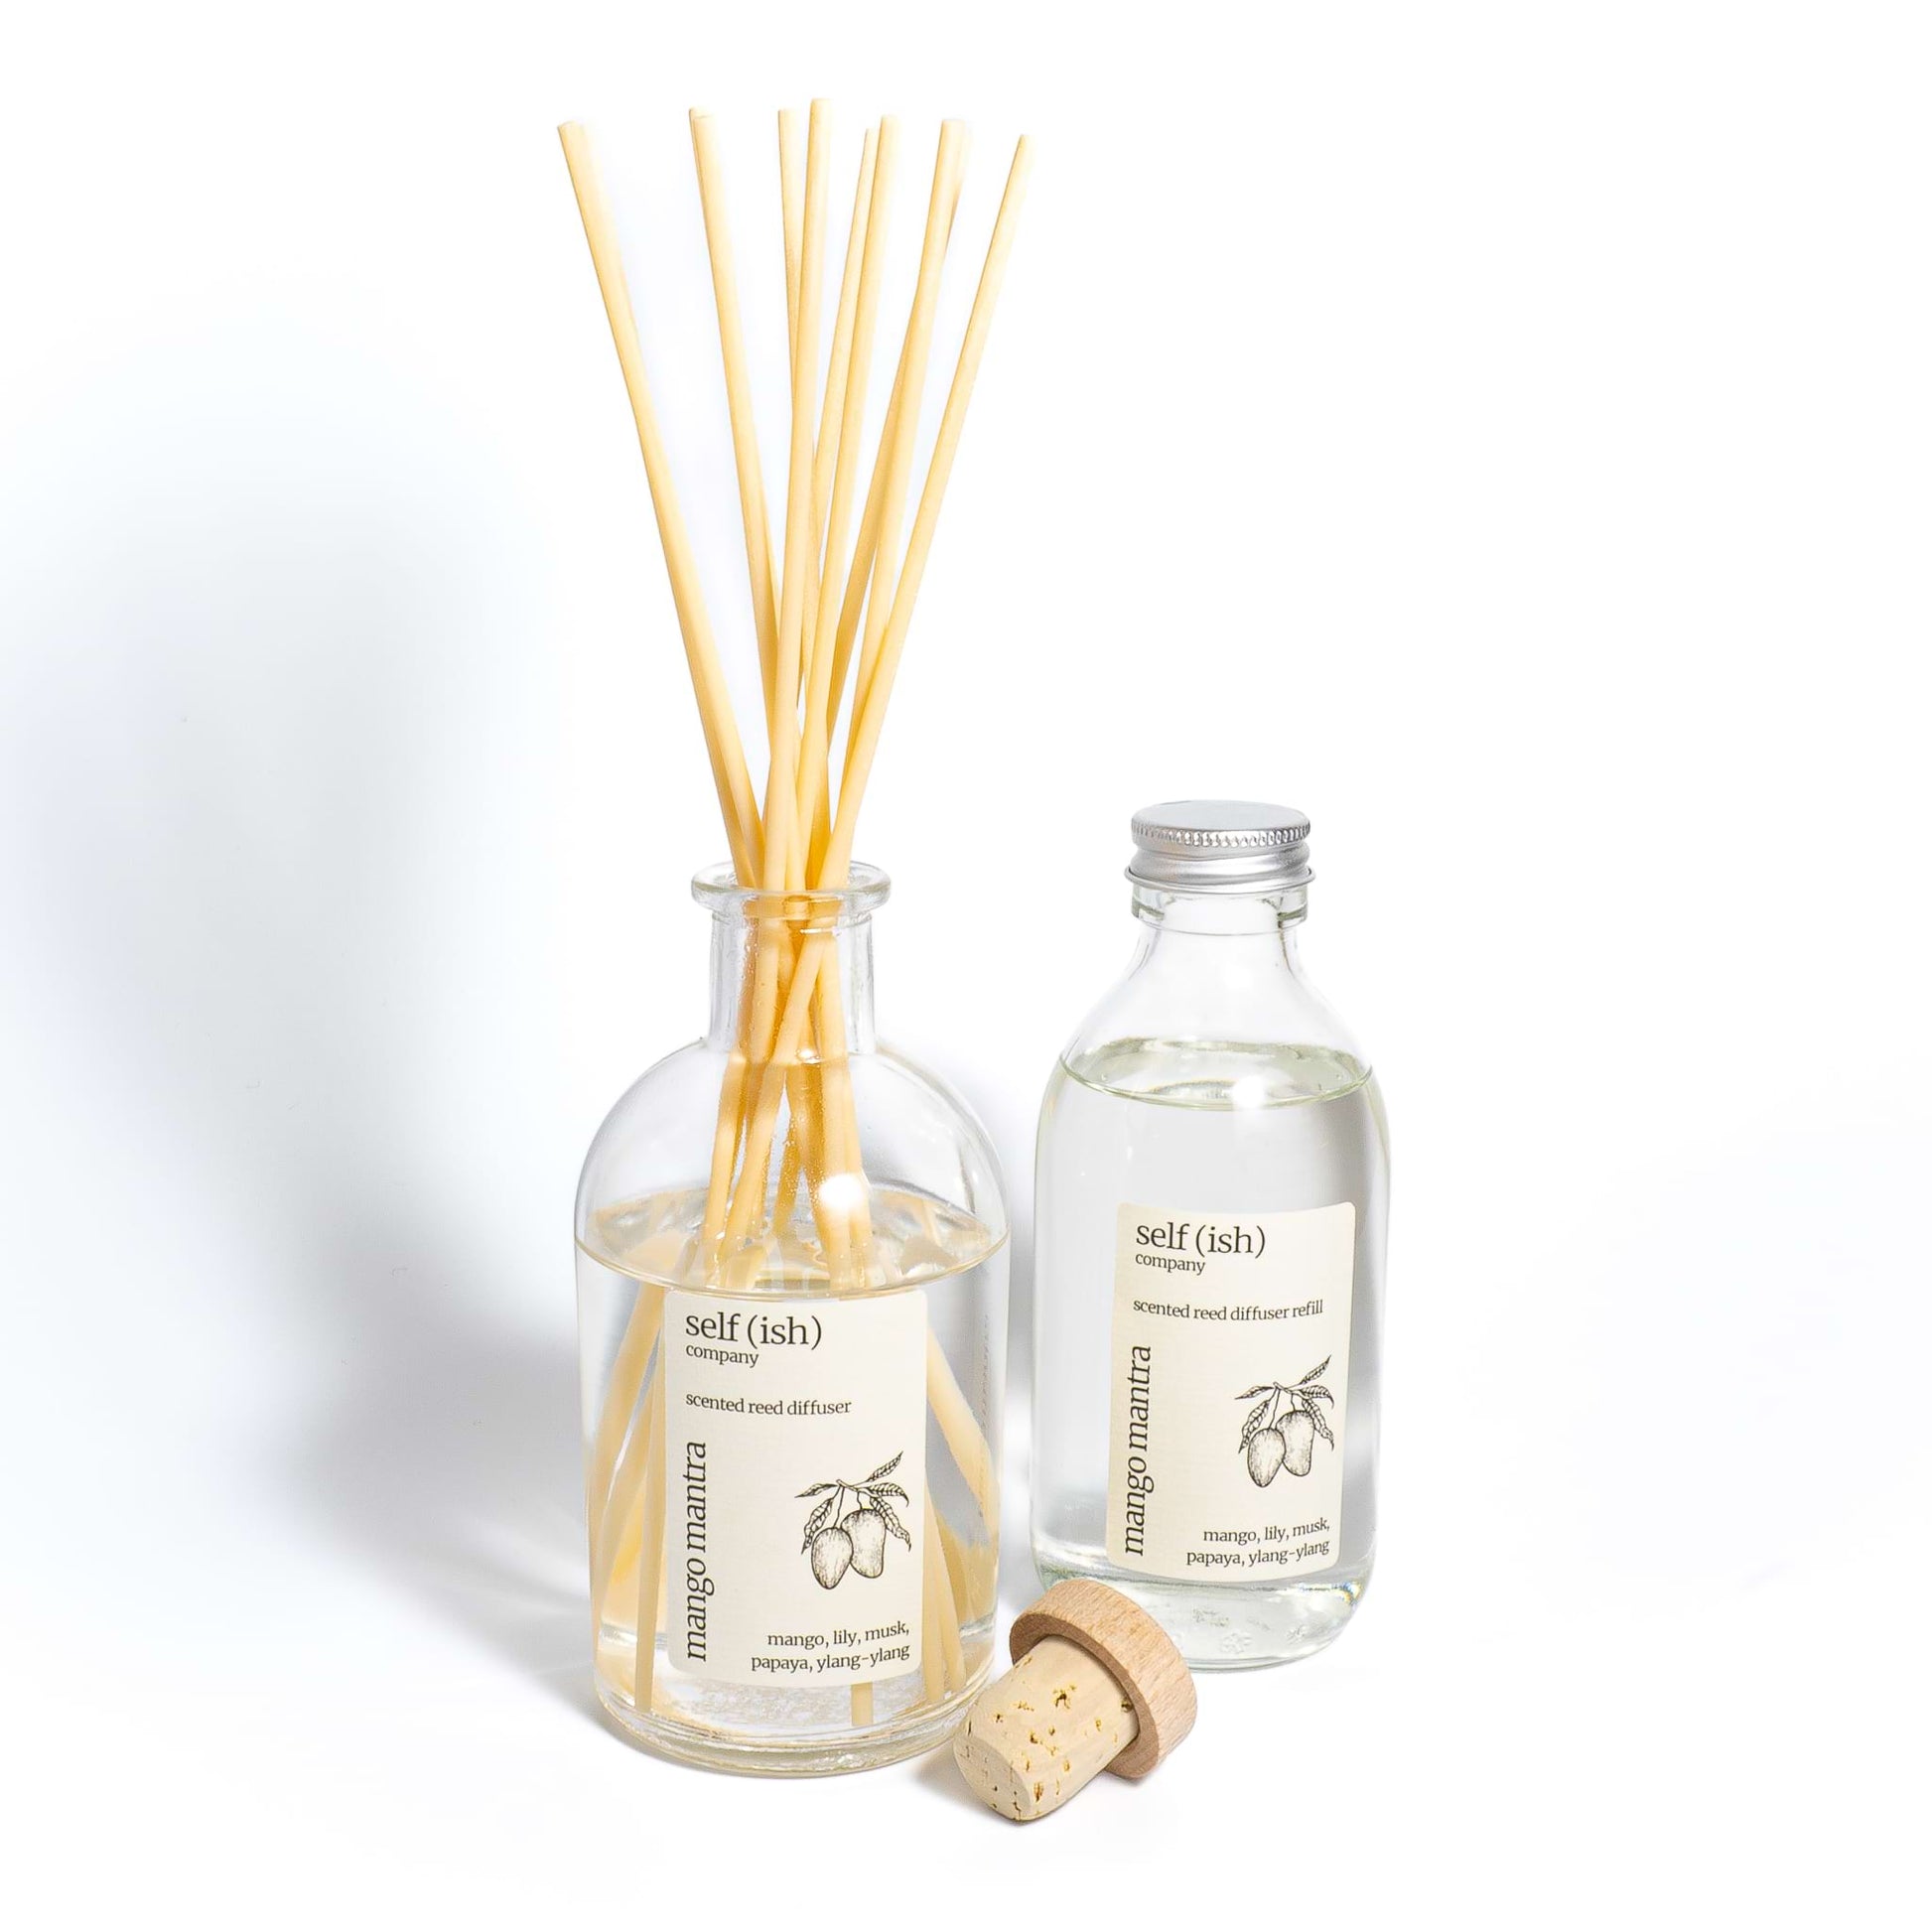 Mango diffuser refill bottle next to mango reed diffuser